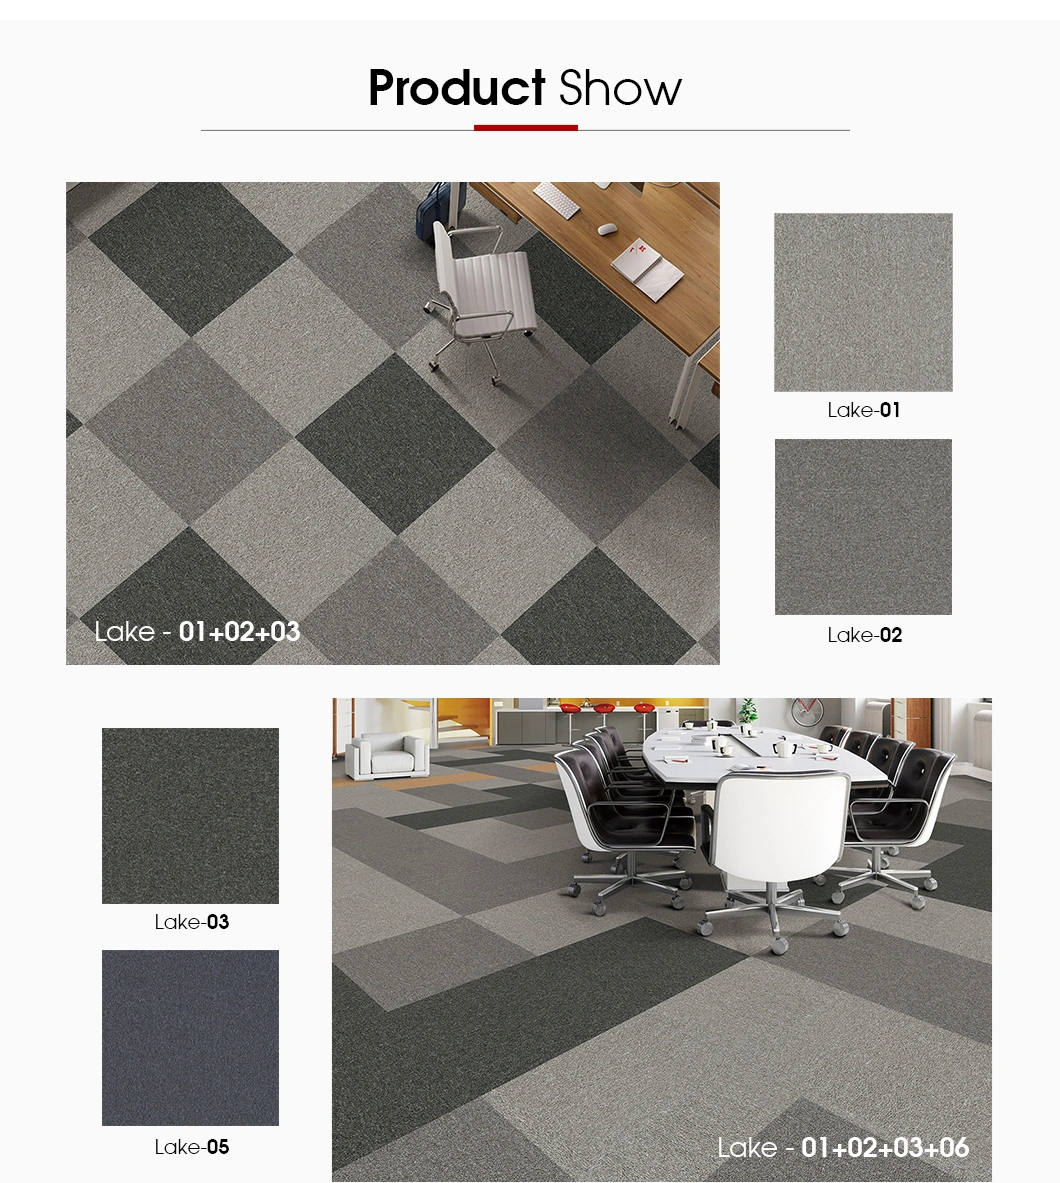 Lkhy Made in China Low Price Good Quality Nylon Plain Color PVC Backing Carpet Tiles Commercial Hotel Home Floor Carpet Modern Office Carpet Mat